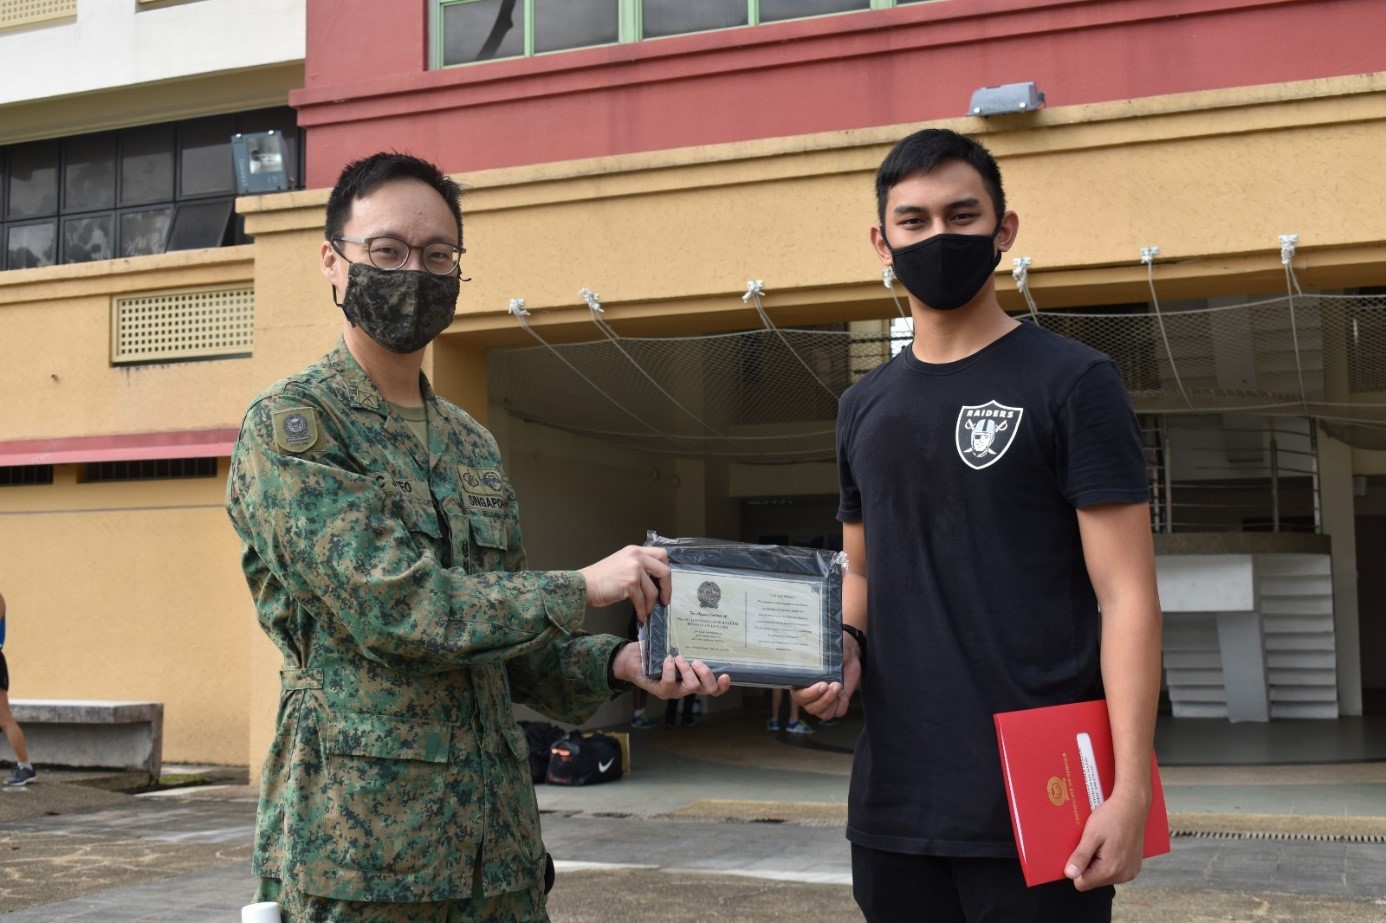 LTC Teo Chun Jin (left) presenting the ORD plaque and certificate to one of the soldiers.